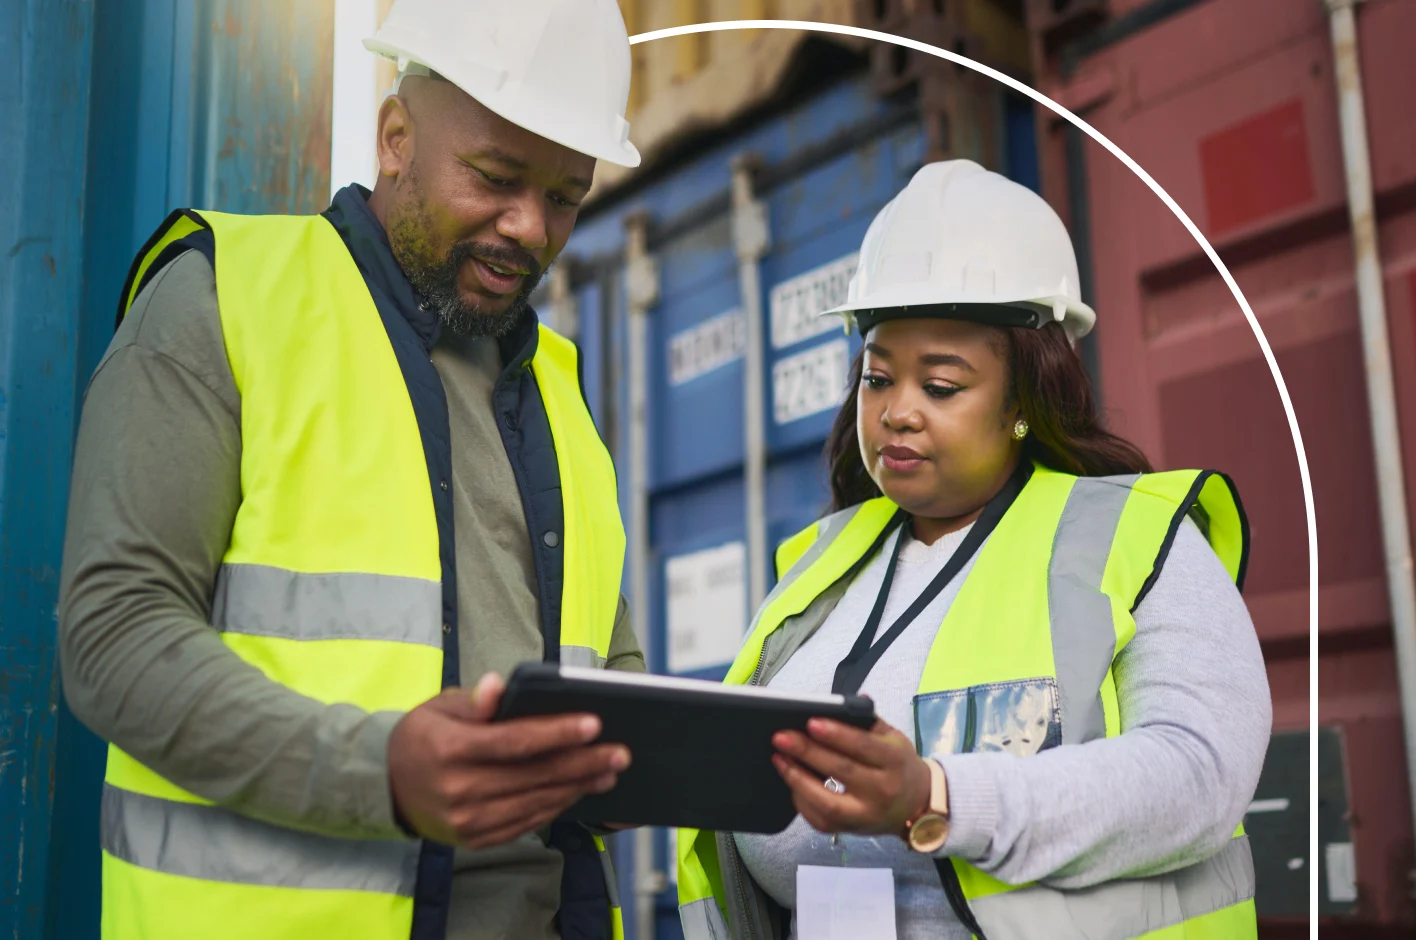 Physical operations workers using technology to power their everyday workflow.